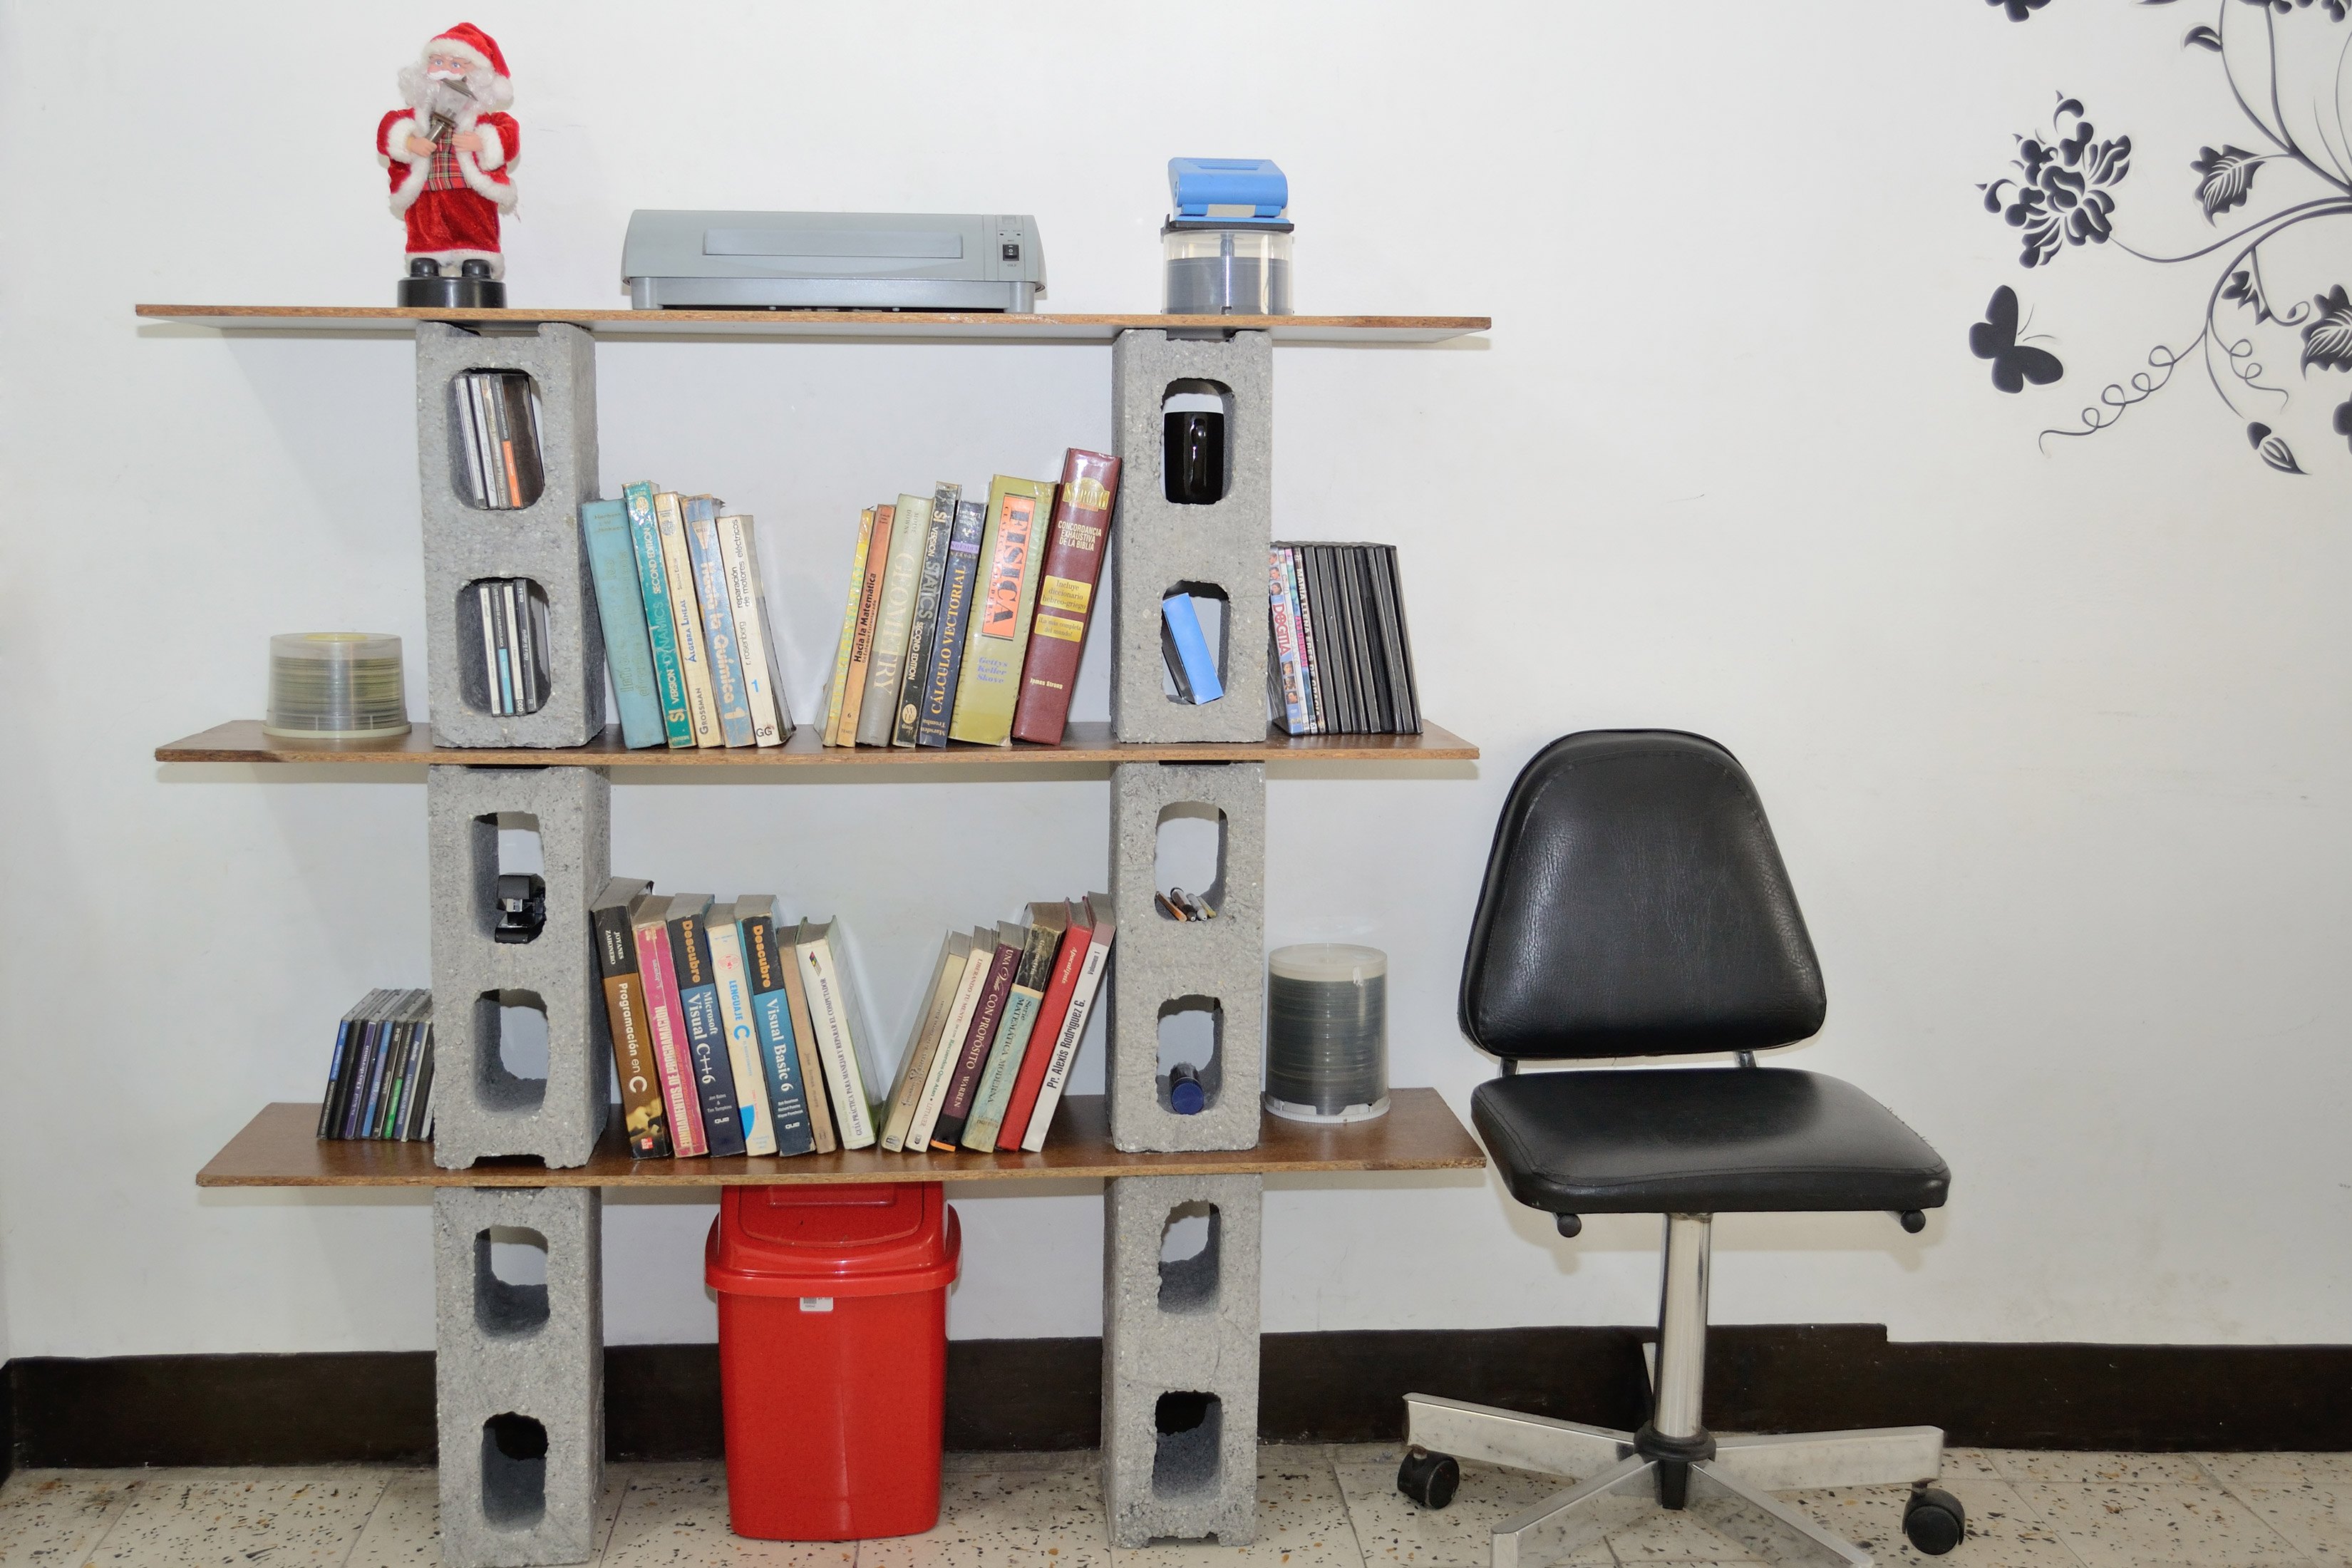 How to Build a Bookshelf Out of Cinder Blocks and Boards | eHow